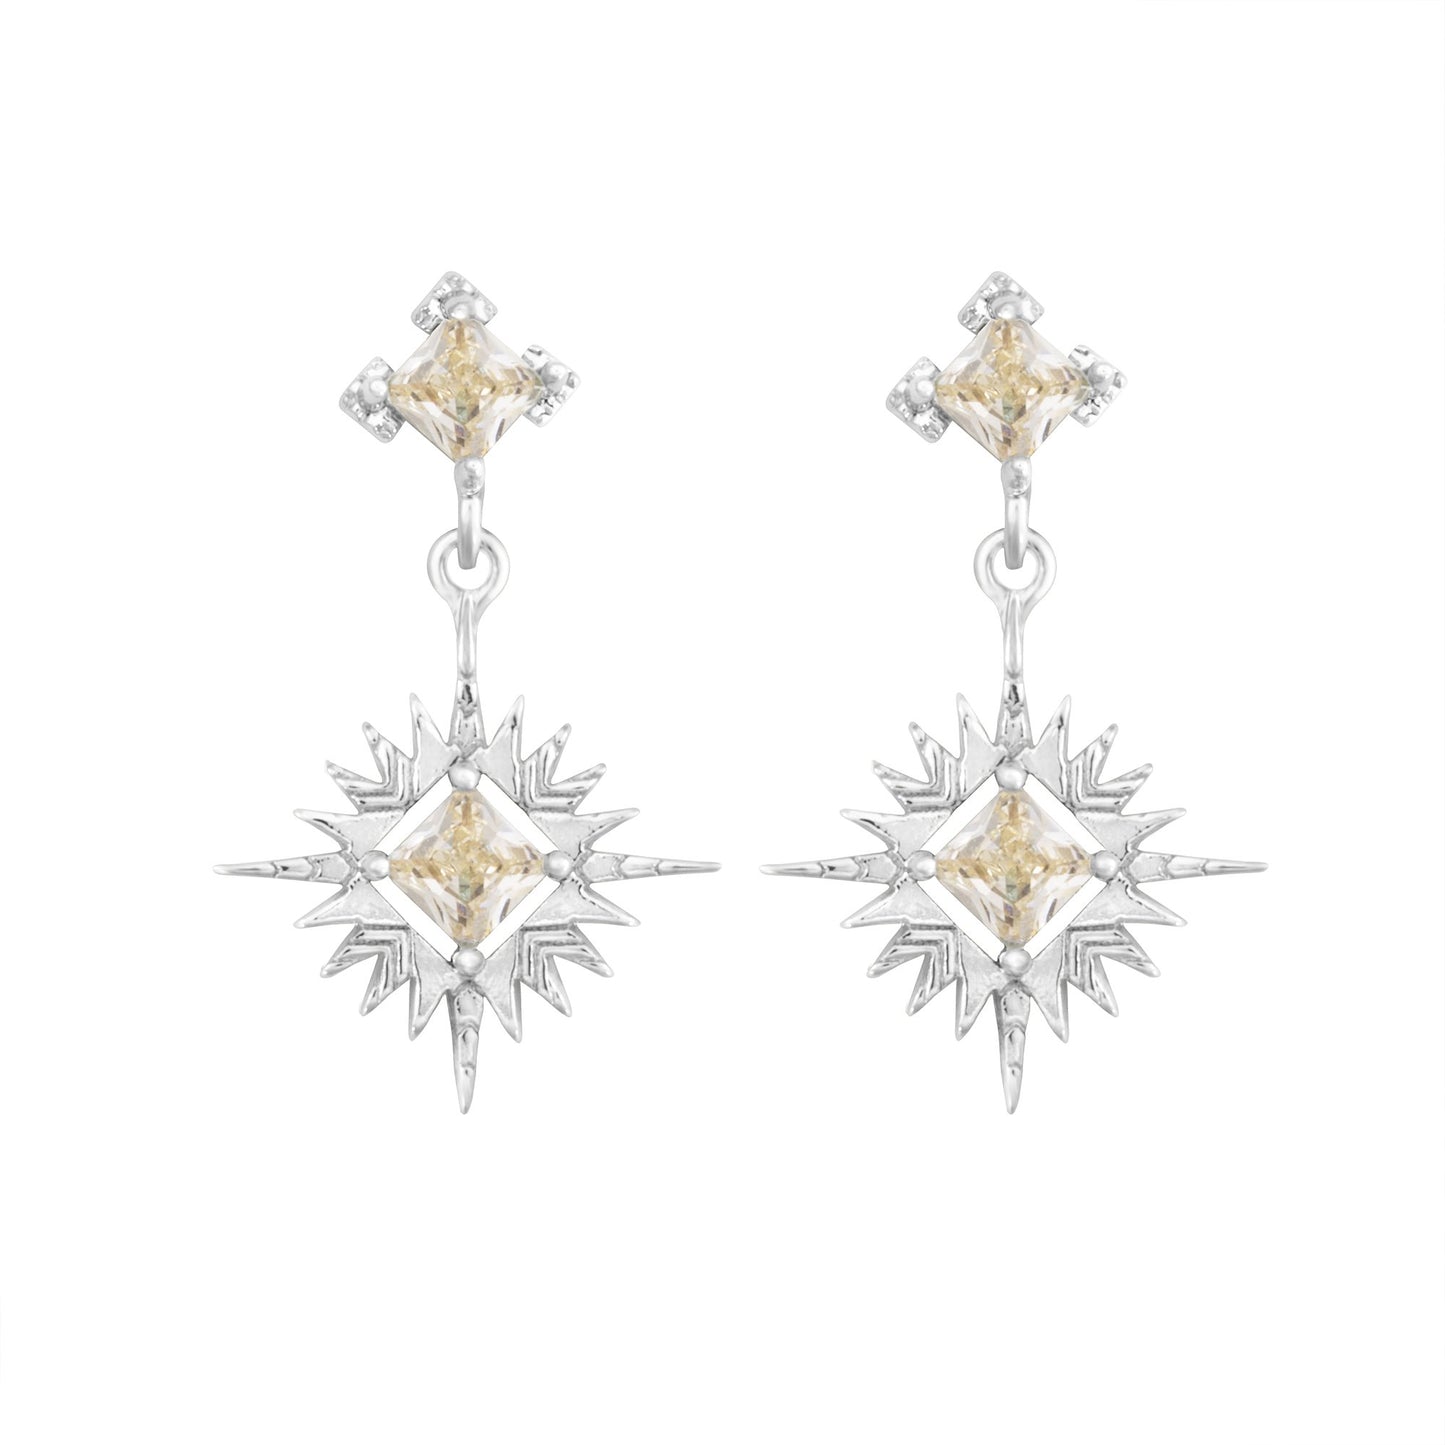 A Dusting of Jewels - Starburst Earrings | Gold